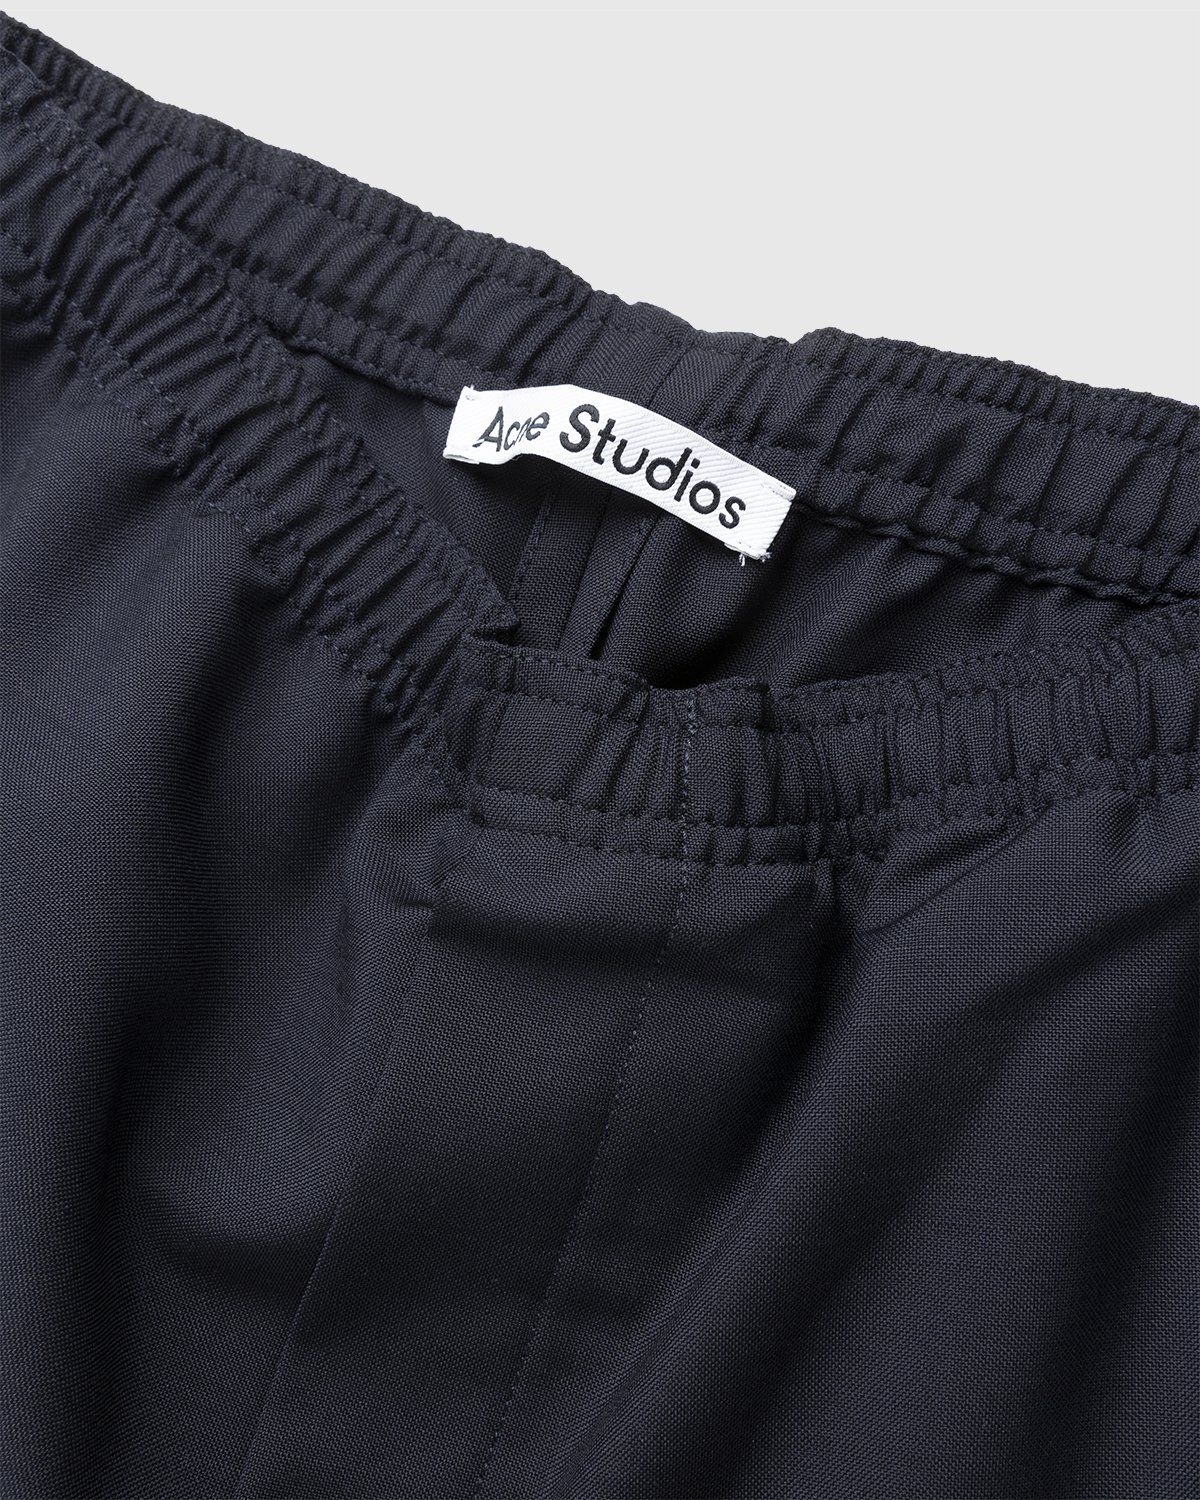 Acne Studios – Mohair Blend Drawstring Trousers Navy - Trousers - Blue - Image 4